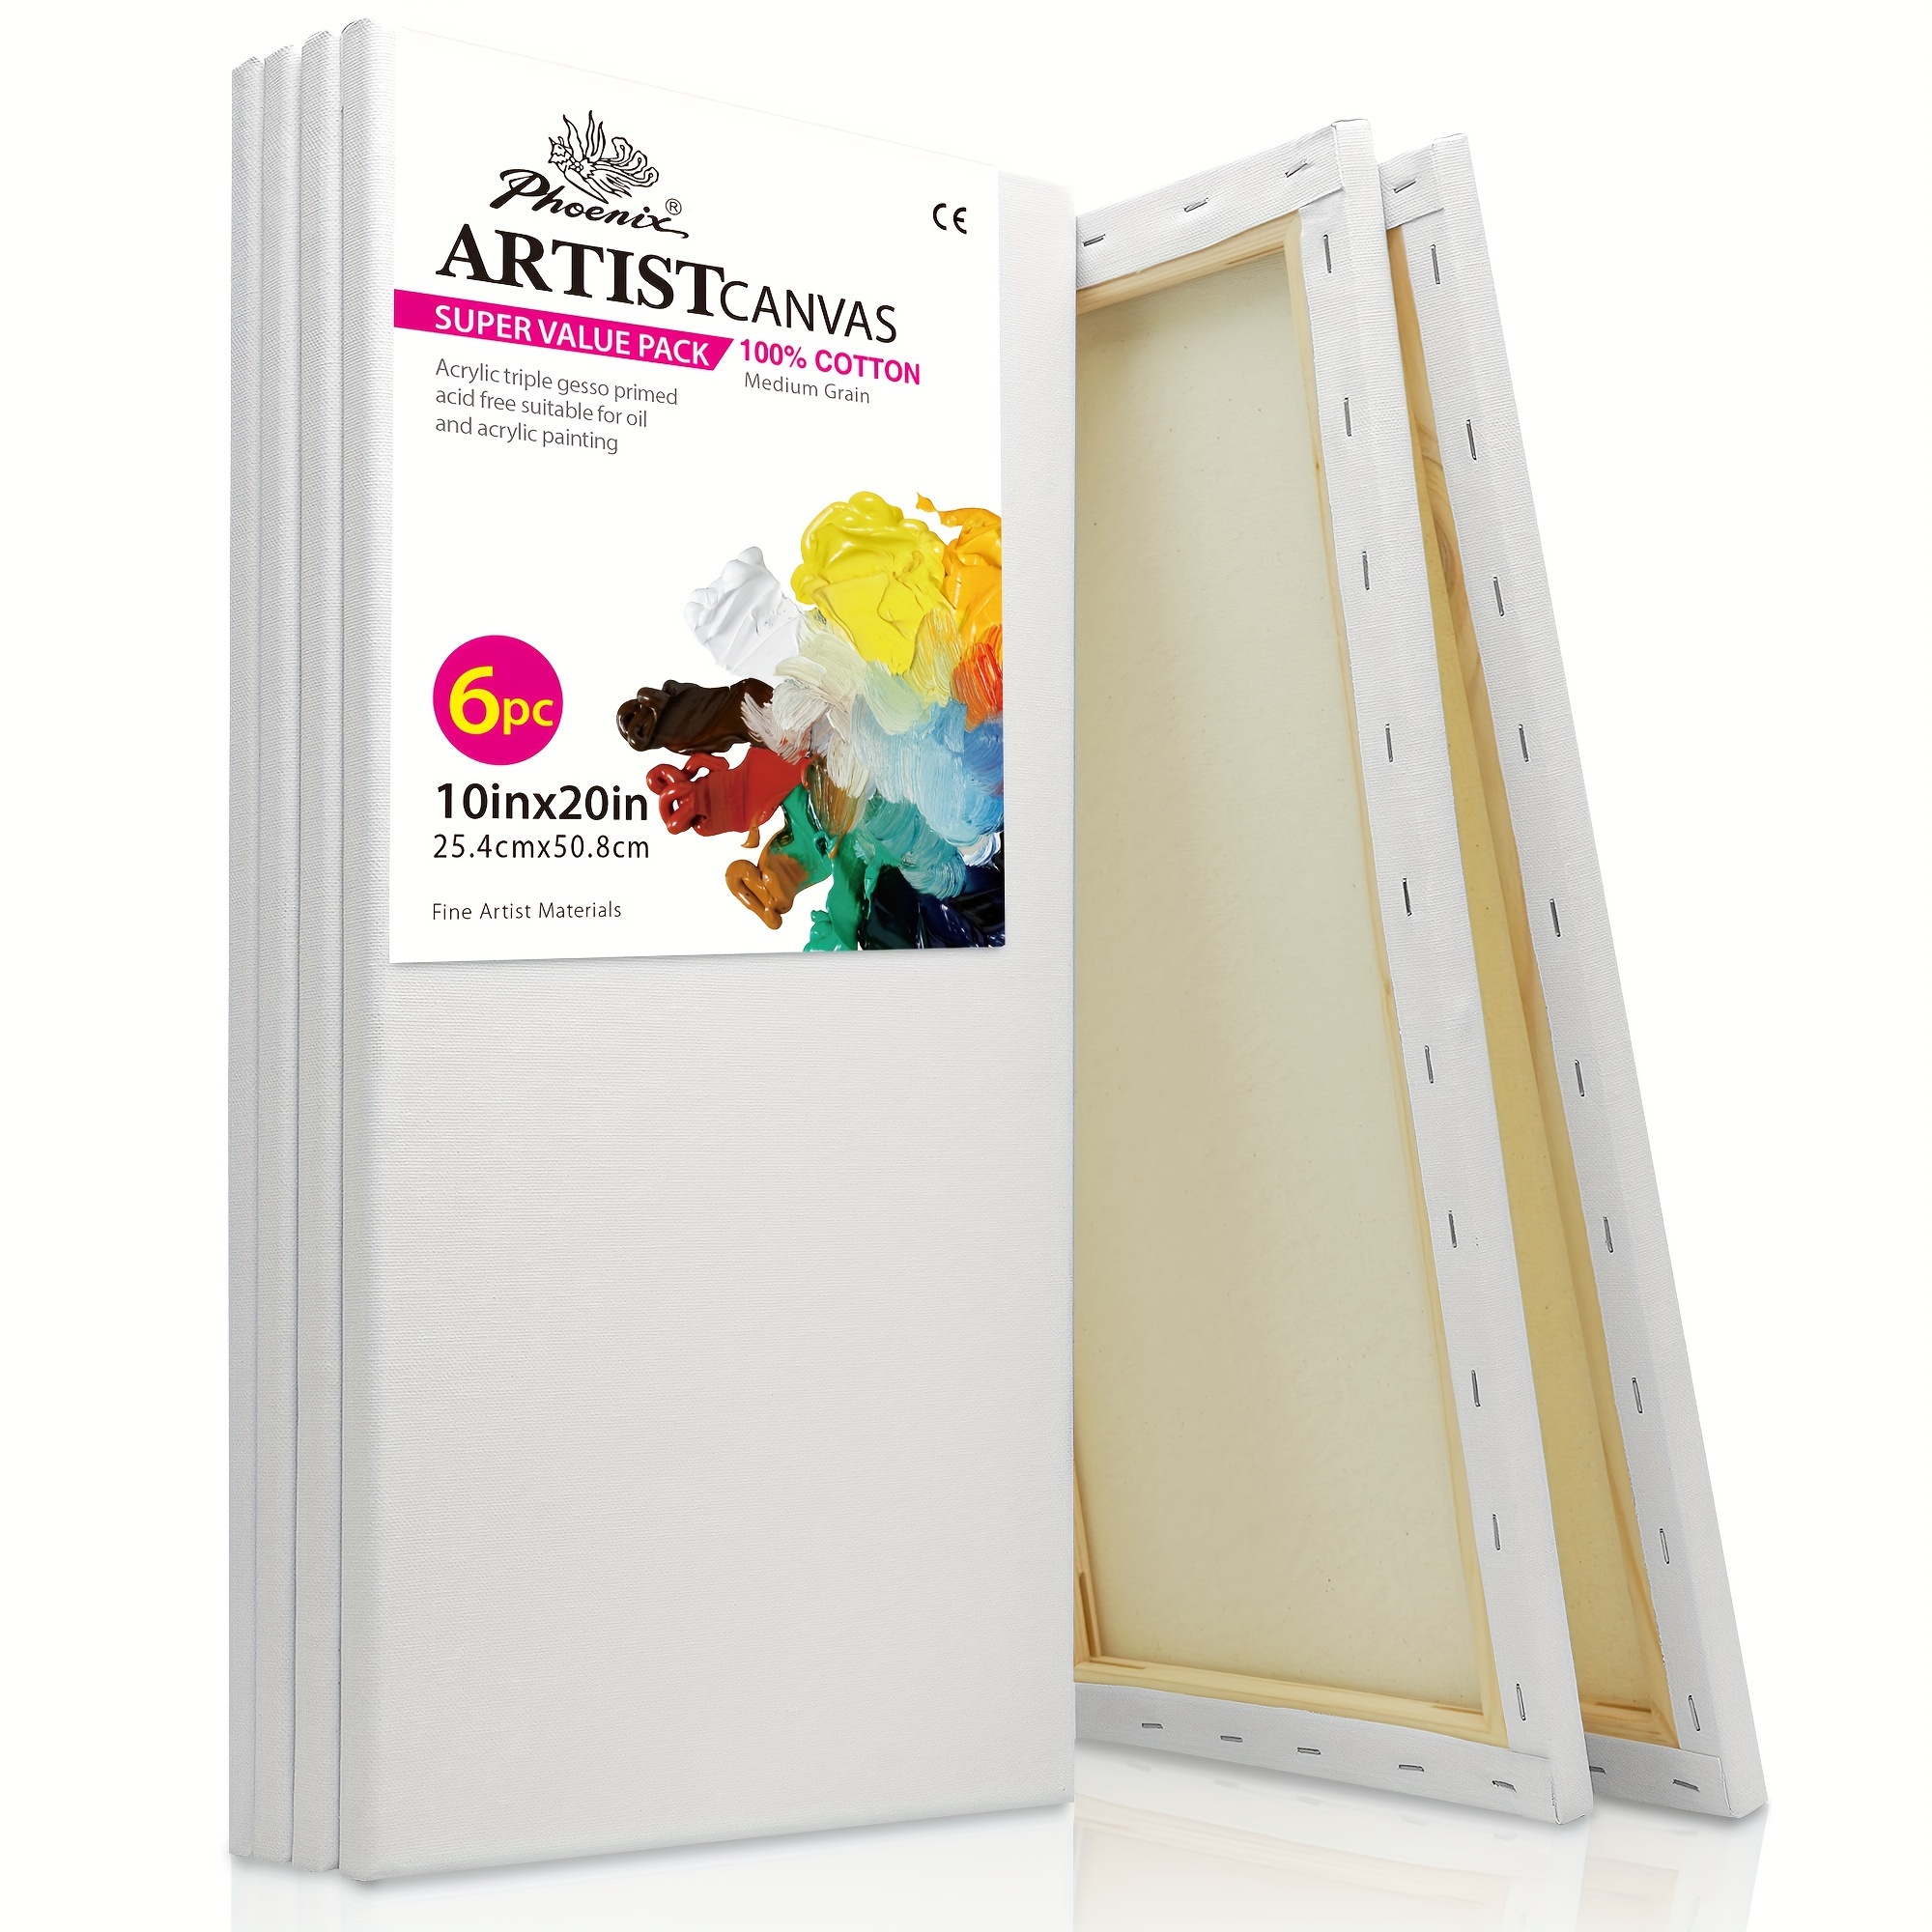 

Phoenix Long Stretched Canvas For Painting 10x20 Inch/6 Value Pack, 8 Oz Triple Primed 5/8 Inch Profile 100% Cotton White Blank Canvas, Rectangular Framed Canvas For Oil Acrylic & Pouring Art